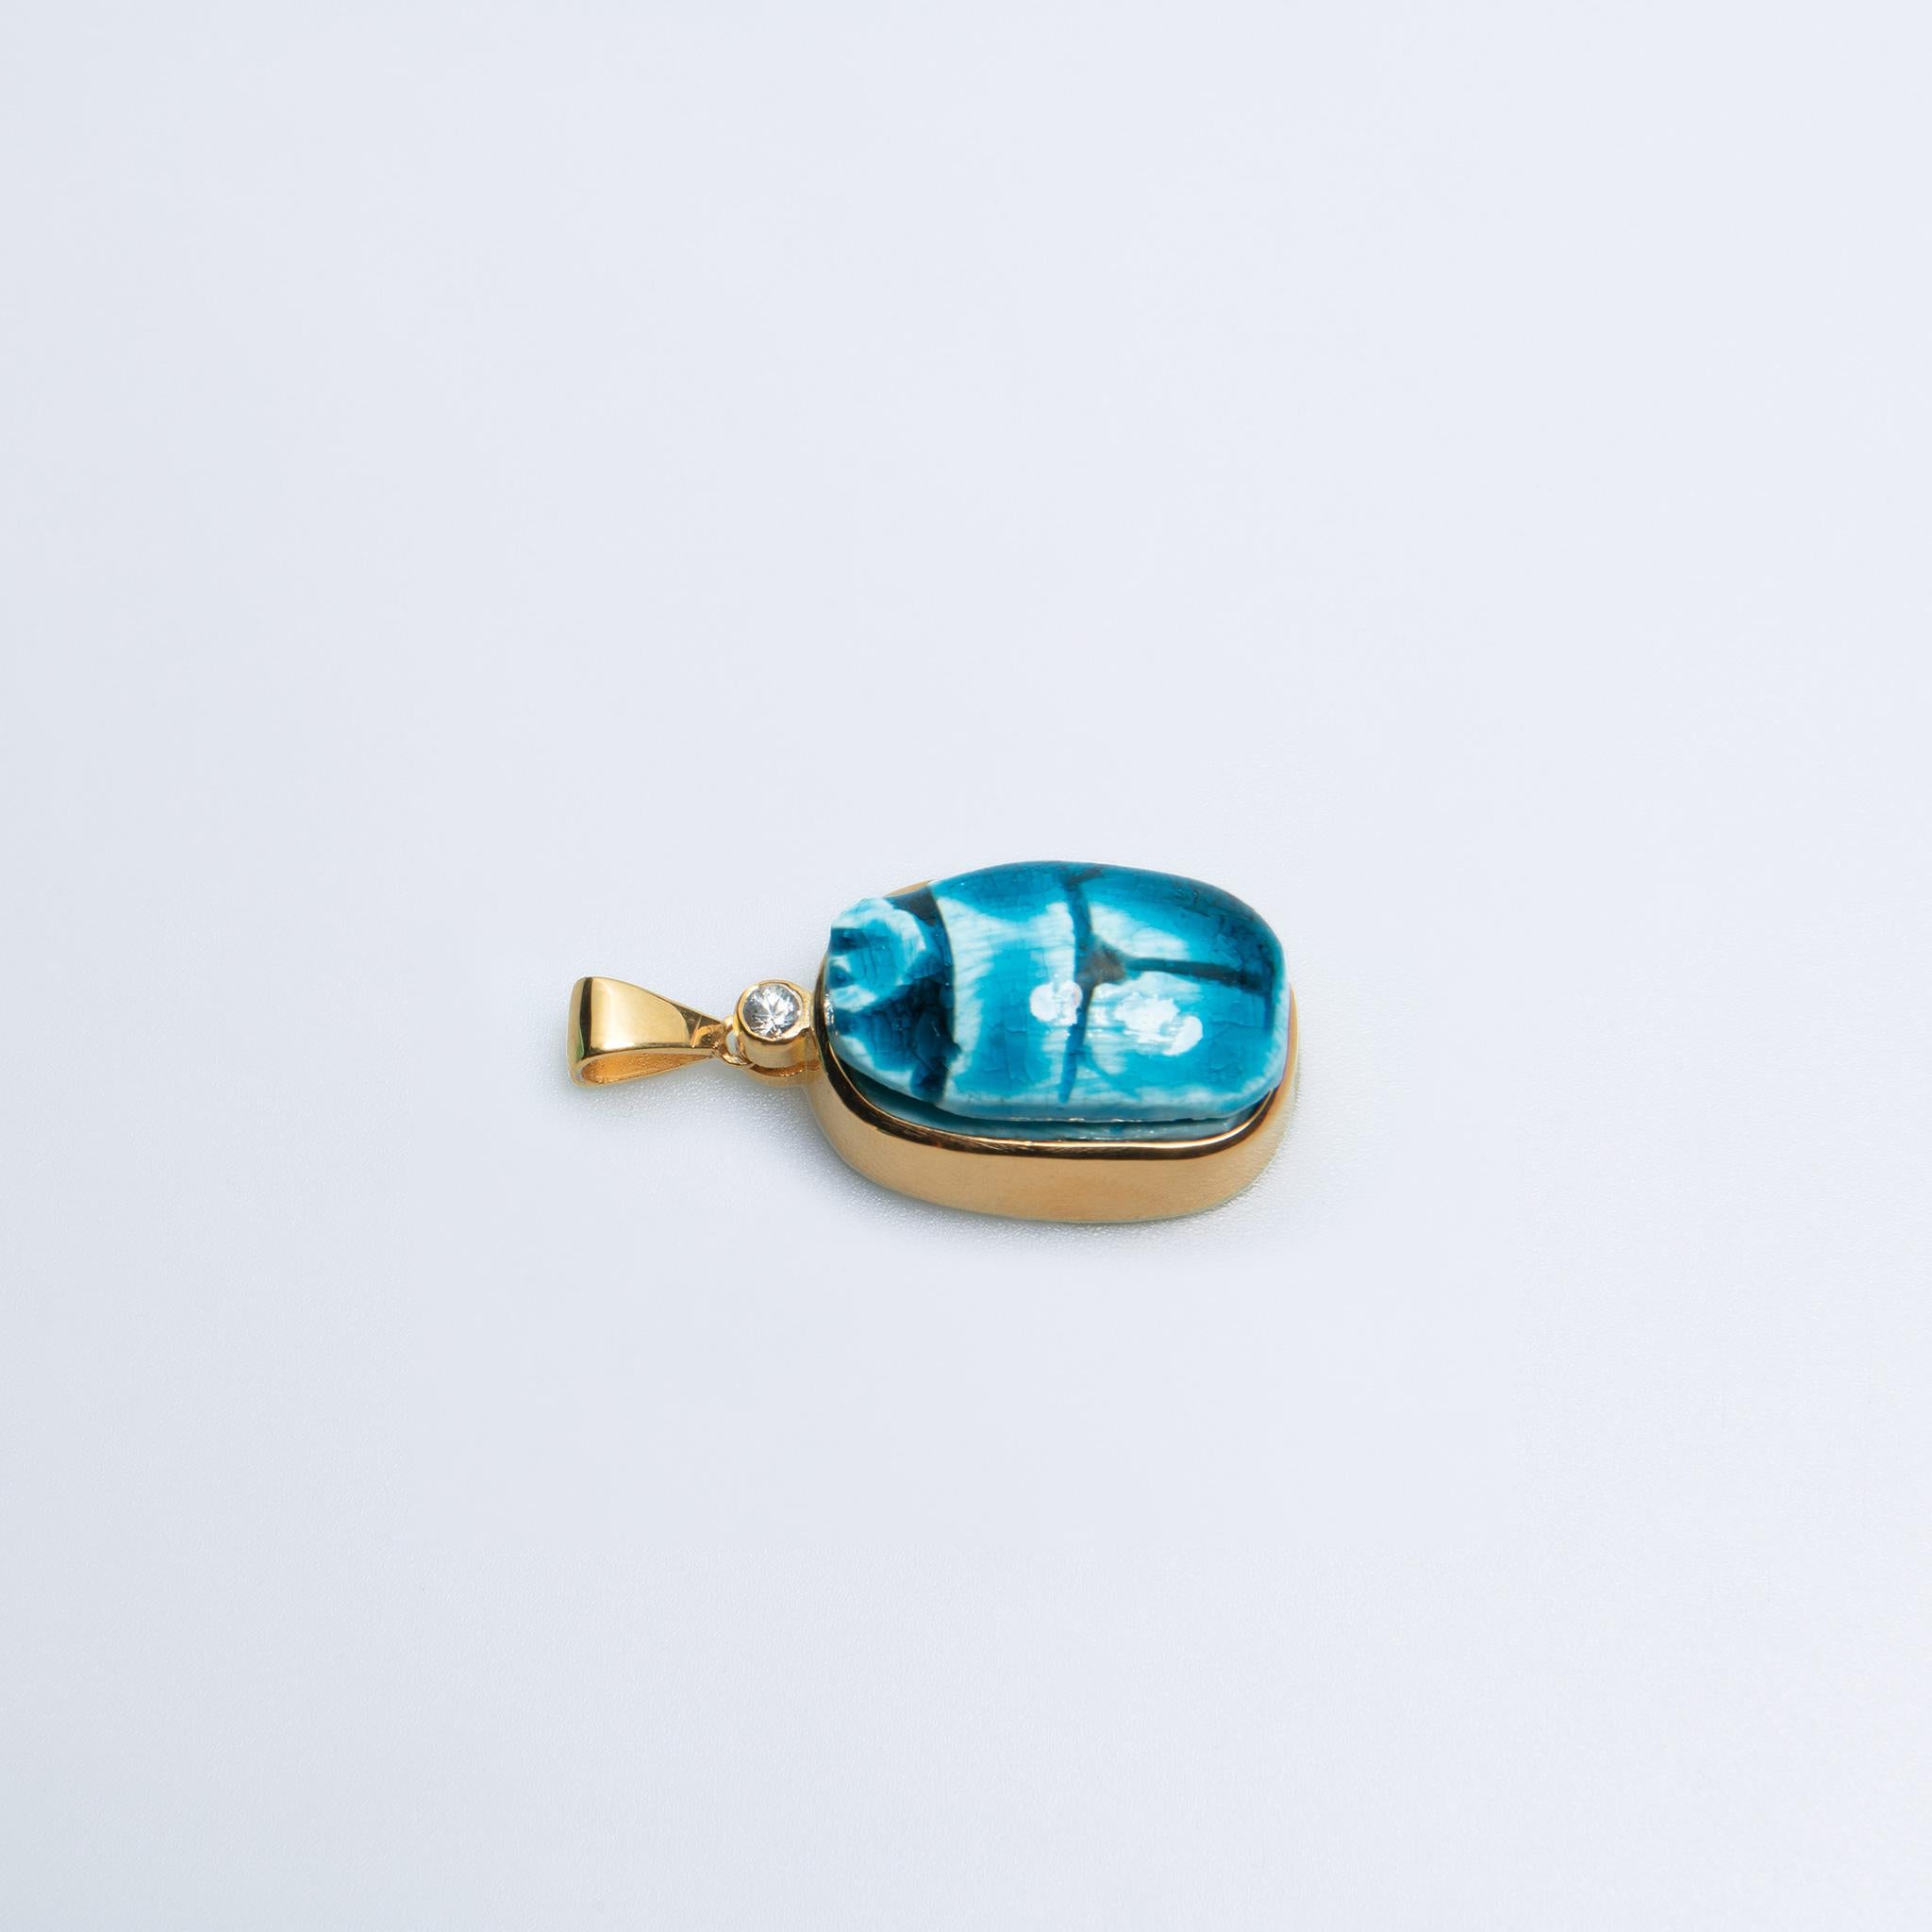 House of Sol Gold filled Silver Scarab Charm with Sapphire For Sale 1